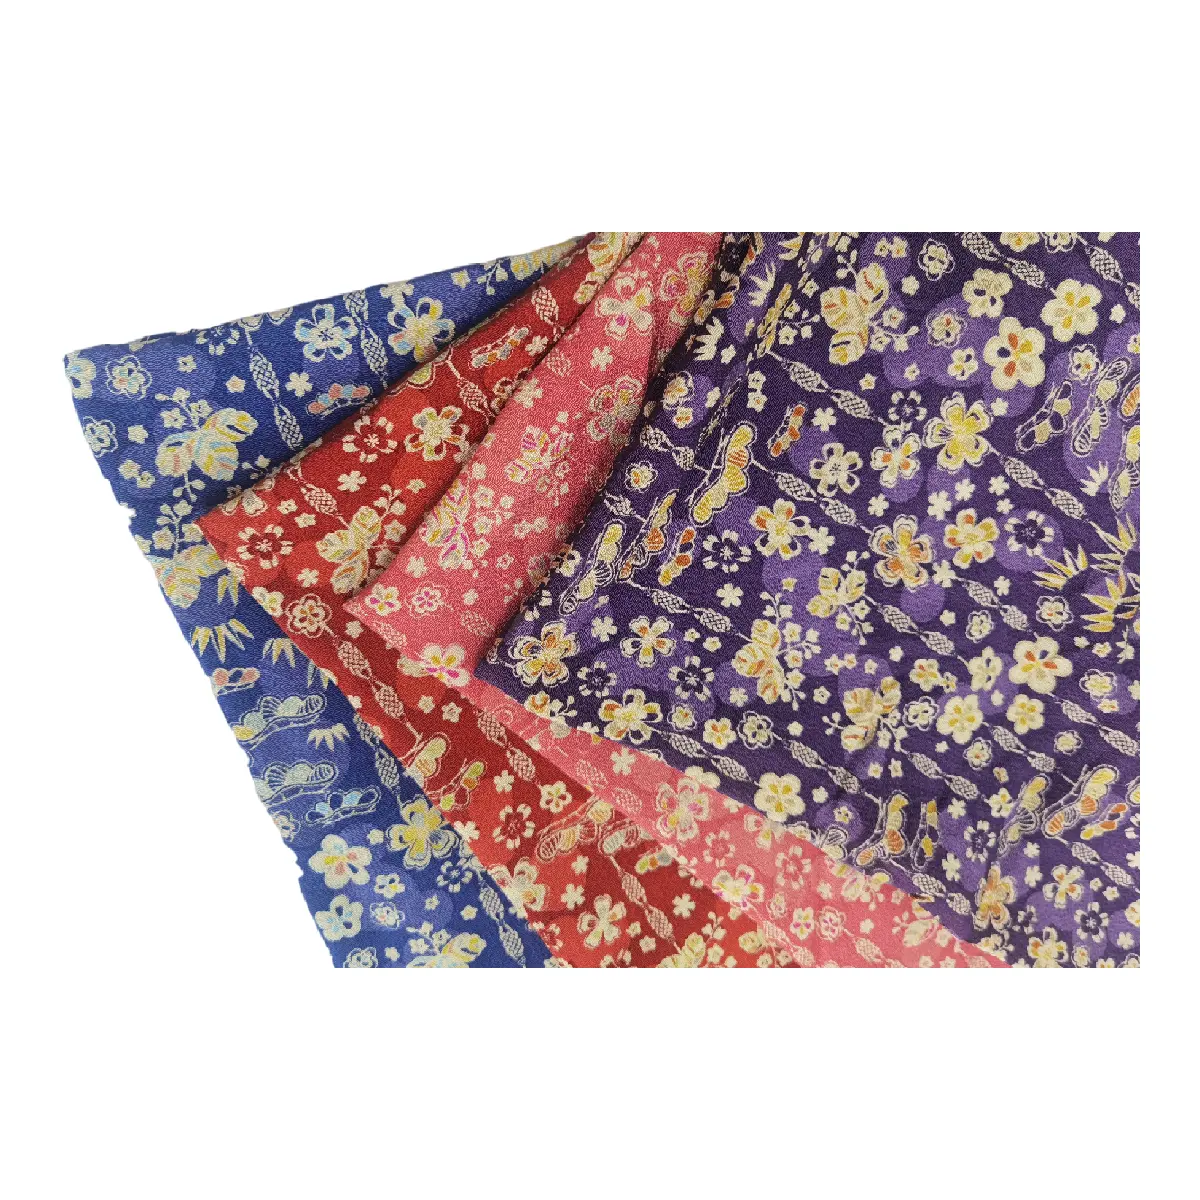 Wholesale Price 90cm 7 Patterns Japanese Rayon Polyester Crepe Printed Patchwork Fabric for Japan Toys and Bags